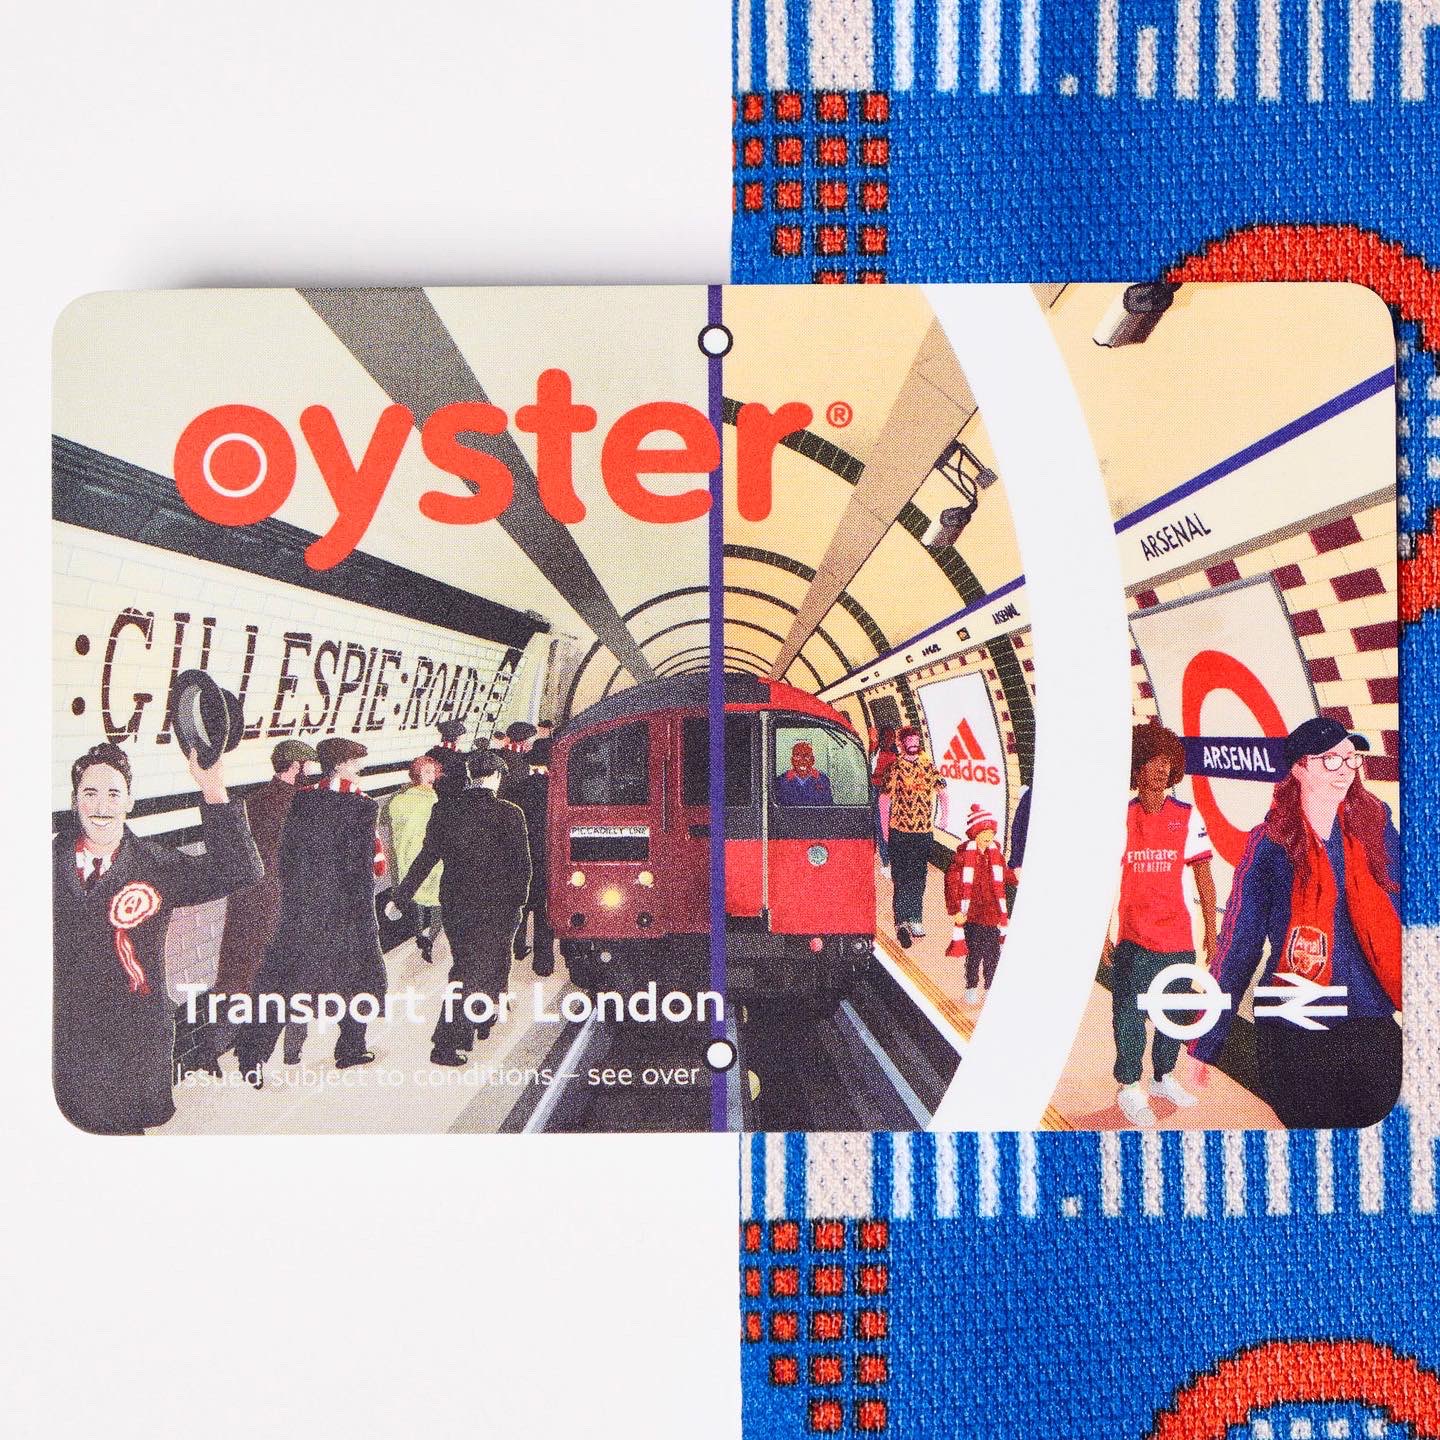 Dangerman on got to design an Oyster card! Thanks to @arsenal and @Adidasfootball for asking me to create a bespoke Oyster card design for their @transportforlondon campaign. It celebrates the